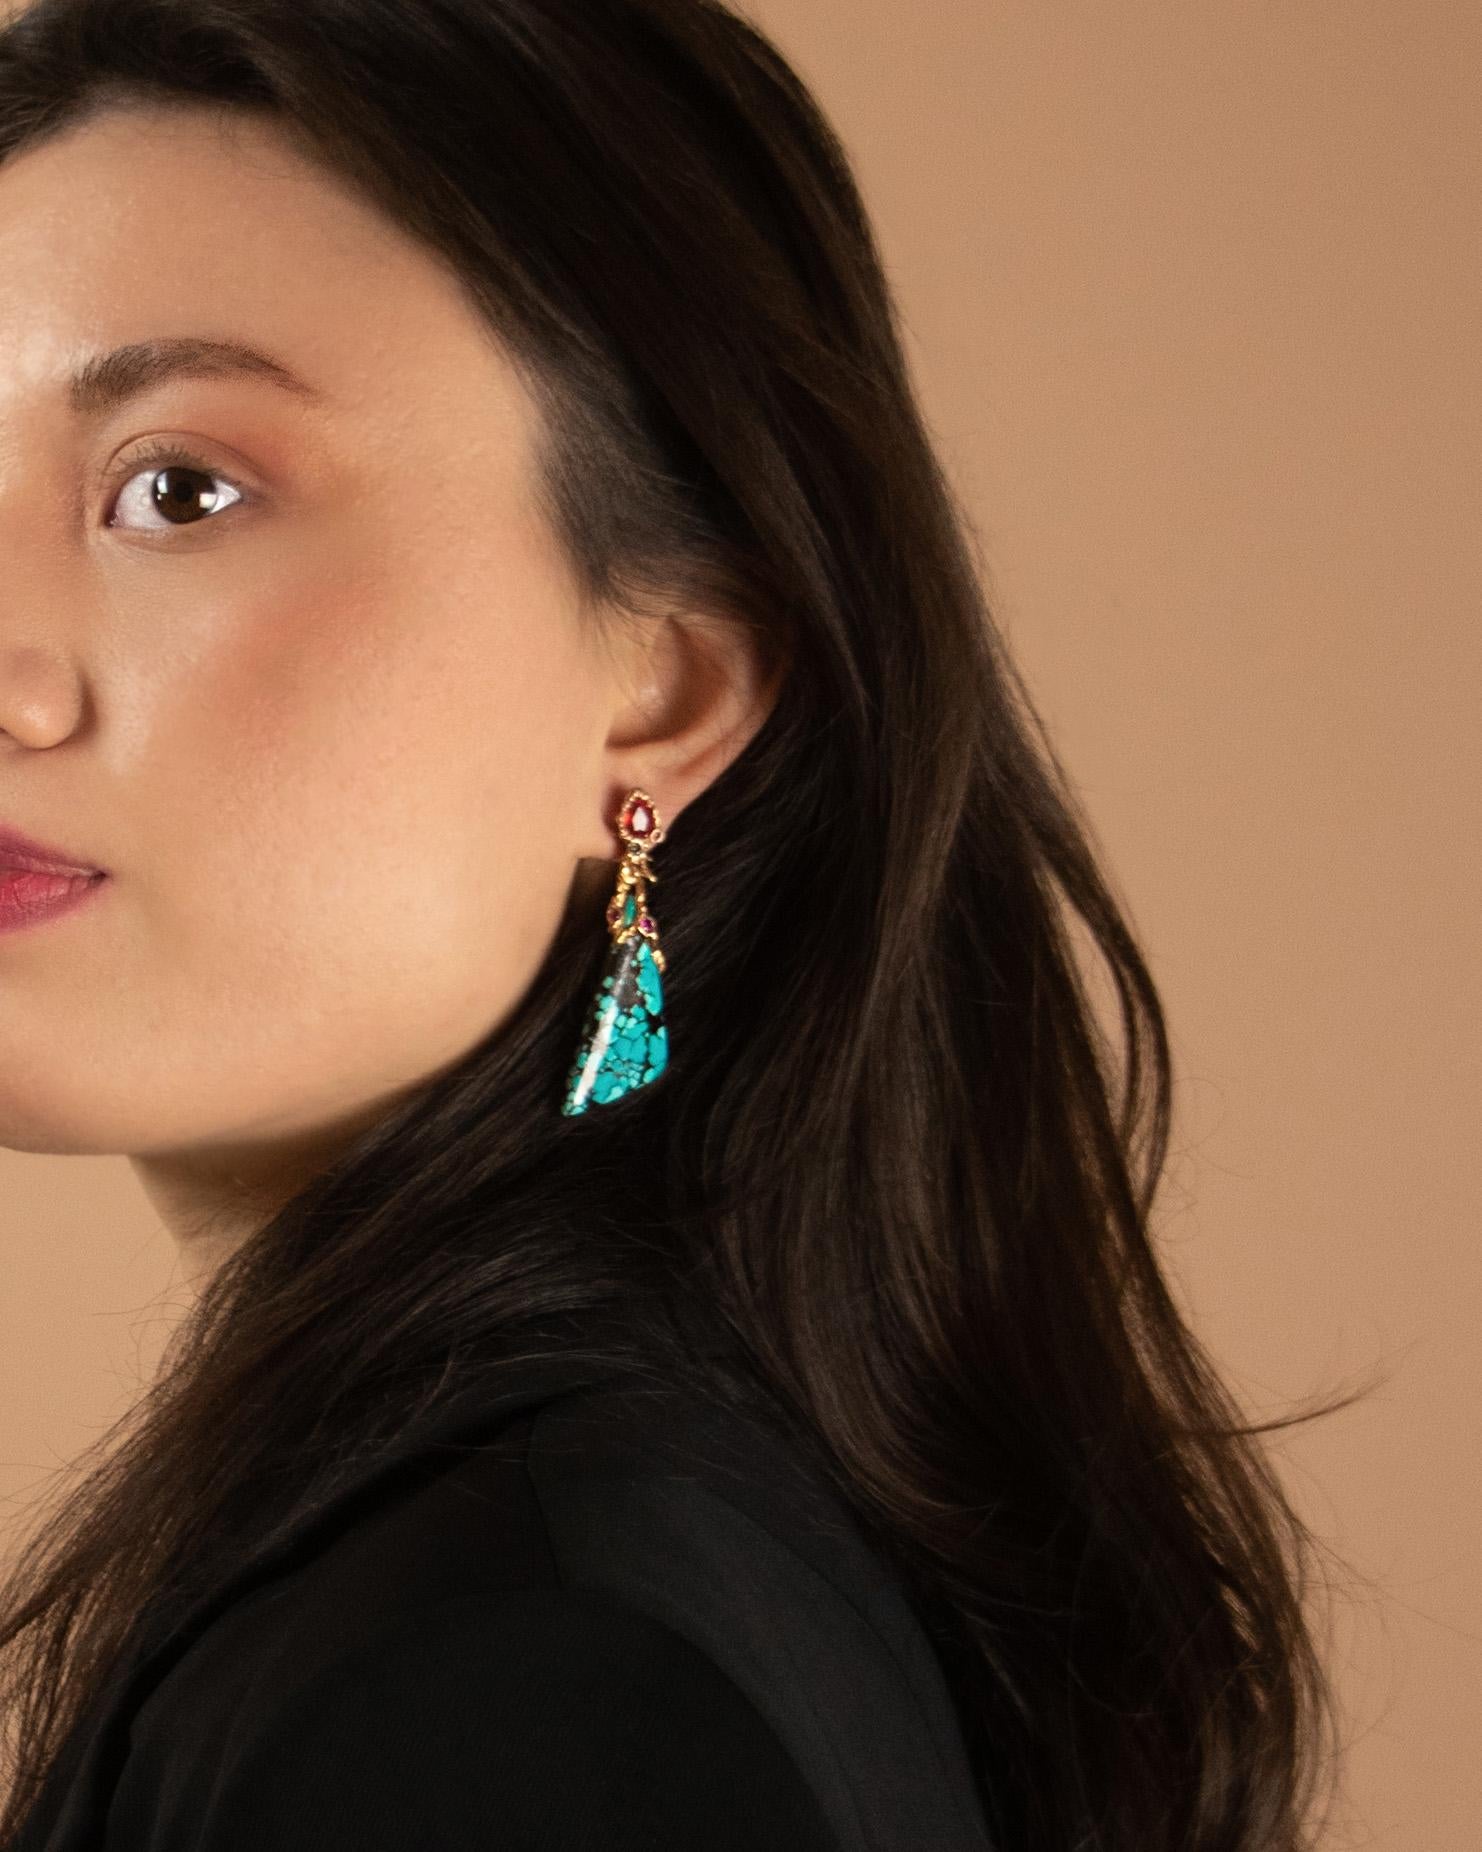 These Lava detachable earrings are inspired by the volcanic eruption in Plato's story of Atlantis. Crafted from 18K Rose Gold, they are embellished with spider-web Turquoise freeform cabochons, pear-shape faceted Orange Sapphires, round faceted